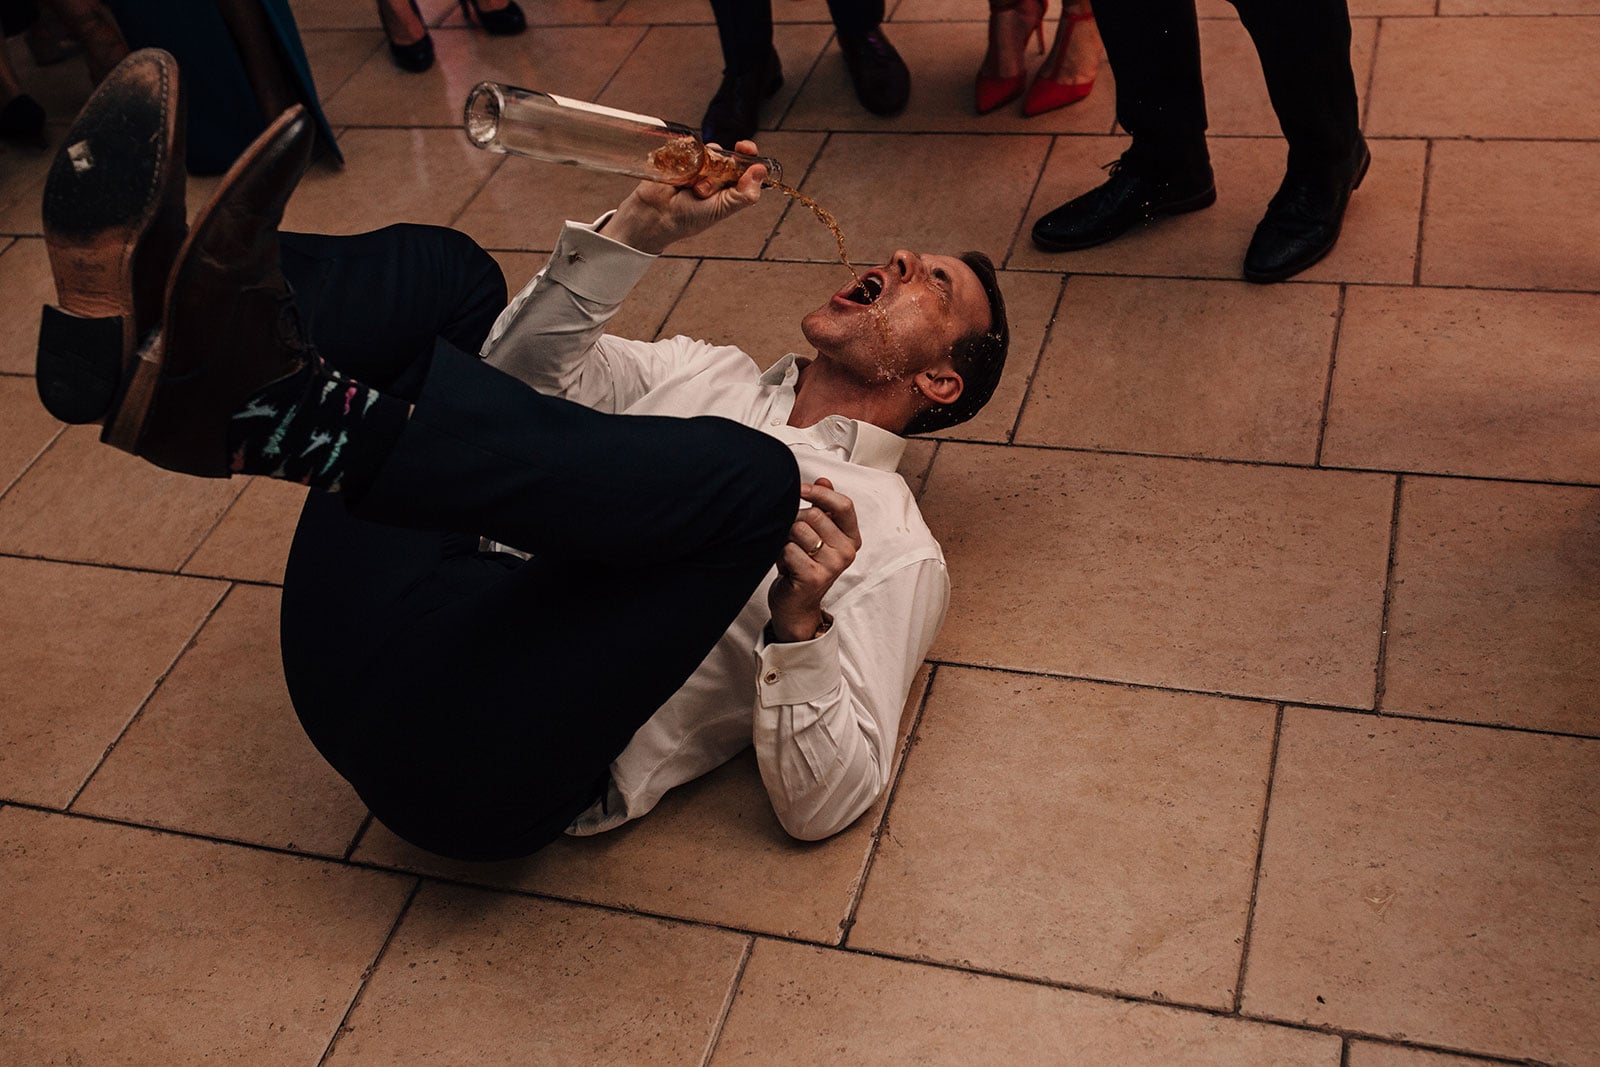 Funny photograph of a man laid down pouring alcohol onto his face on the wedding dance-floor